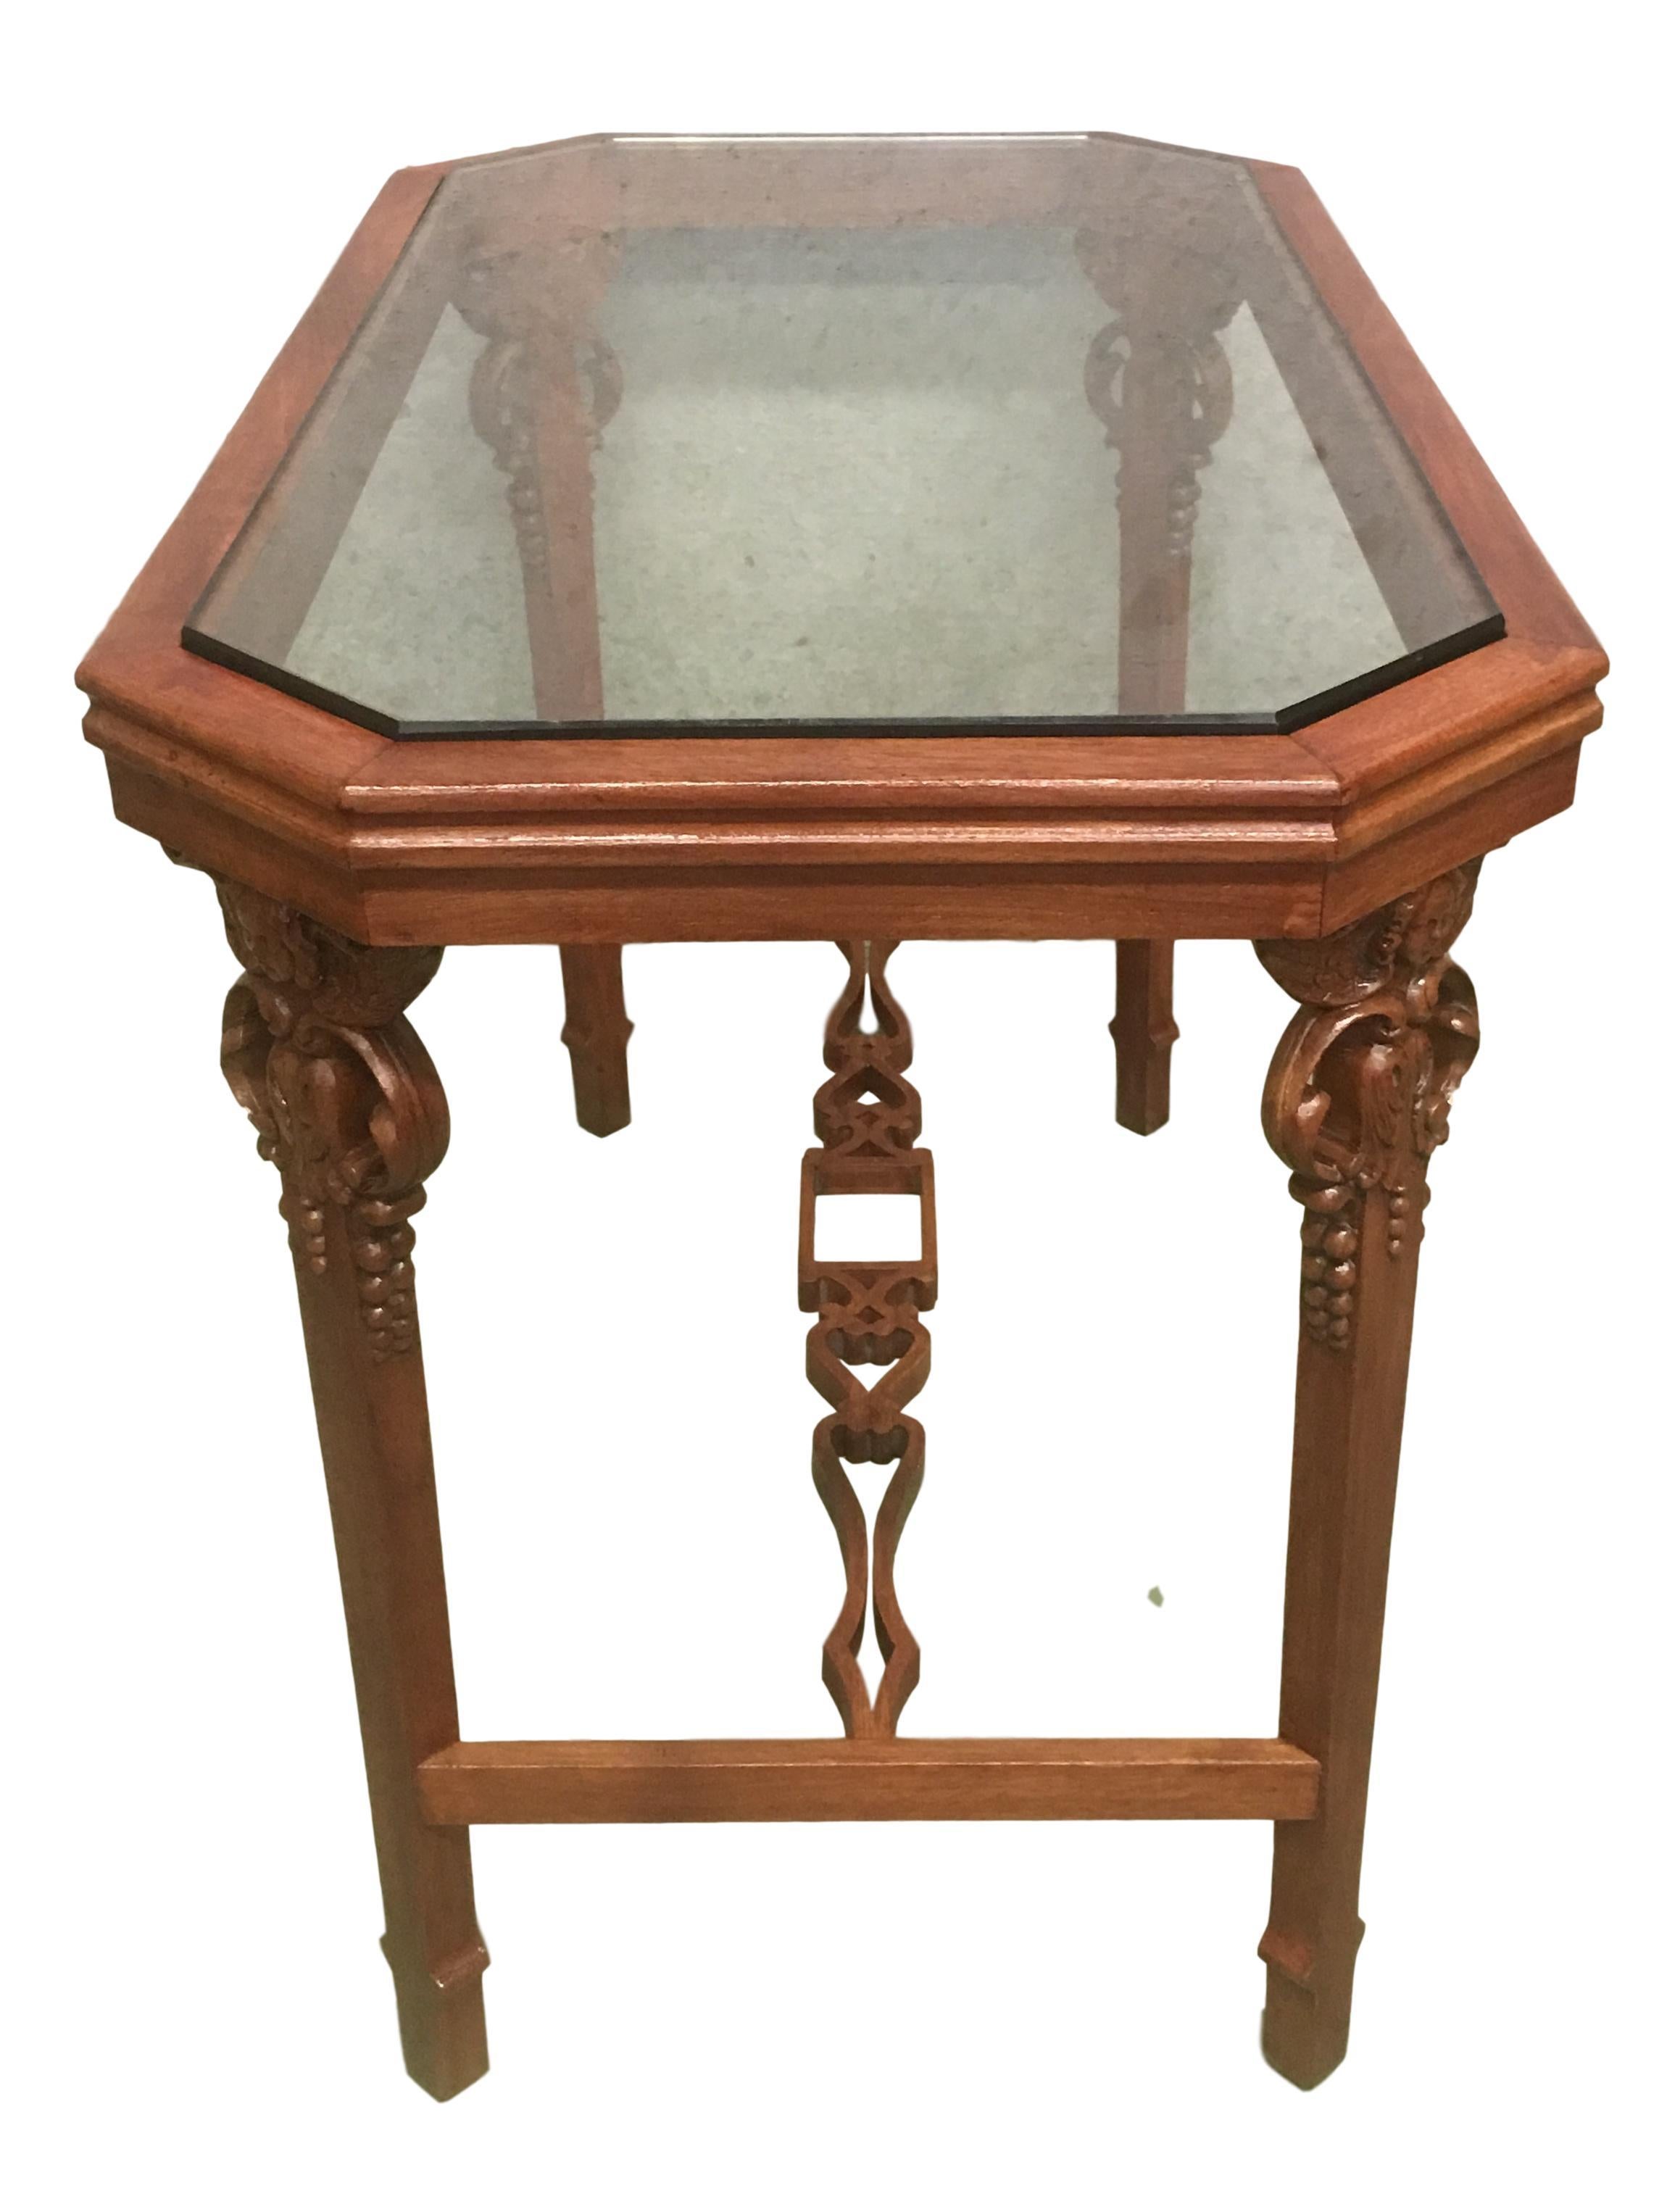 19th Century English Arts & Crafts Elm and Burl Carved Side Table, Glass Top In Excellent Condition For Sale In Miami, FL